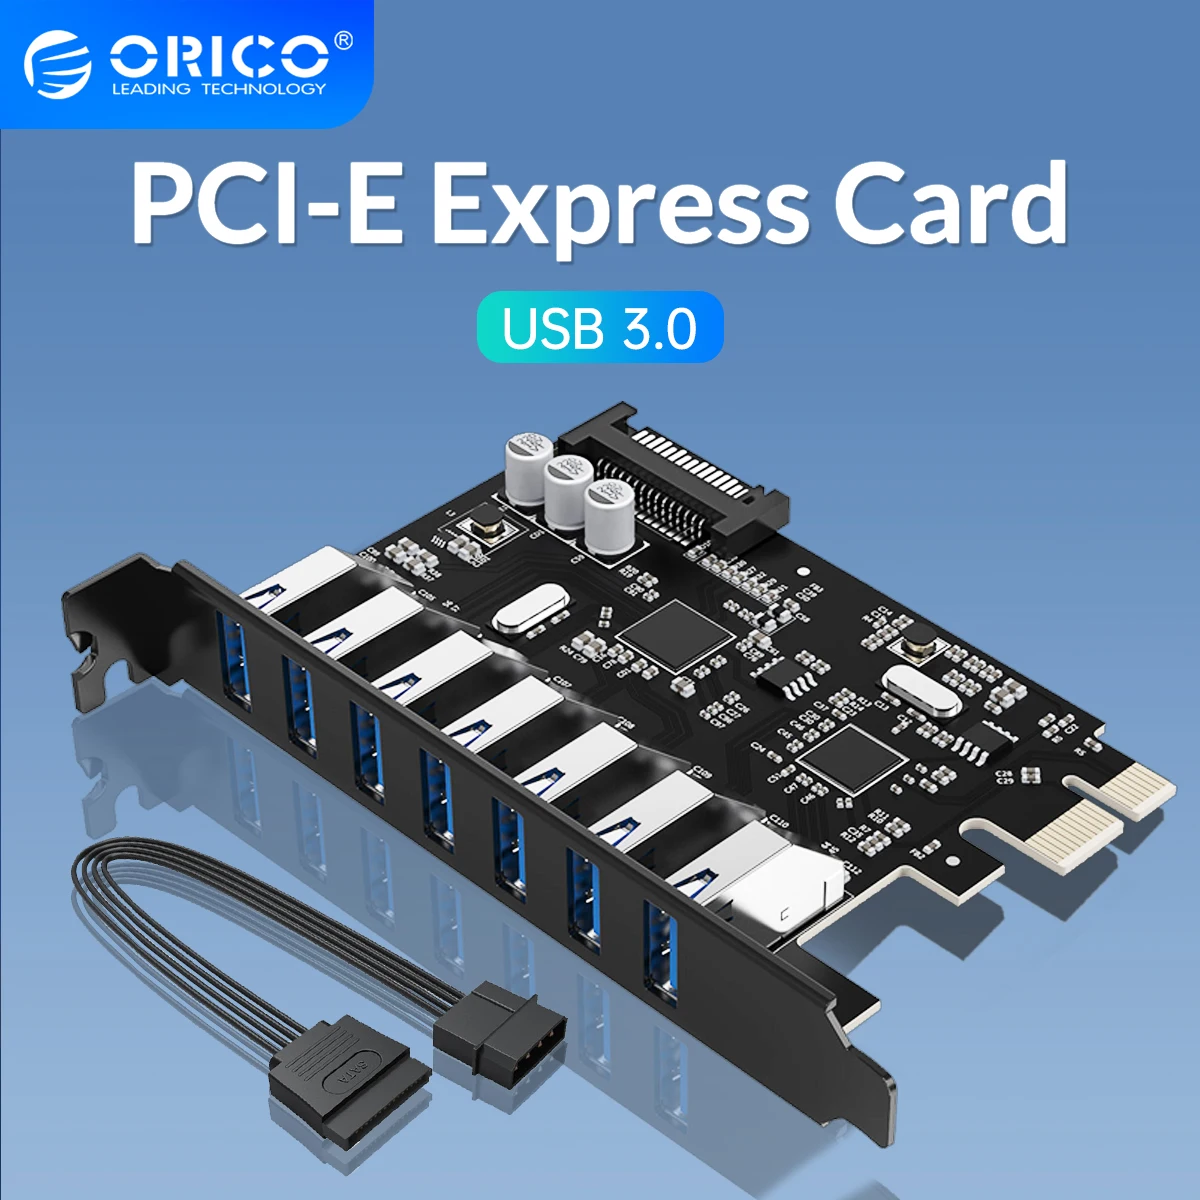 Pcie Usb Expansion Card | Pci Express Card | Pcie Controller | Adapter Pcie  | Portes Card - Add On Cards & Controller Panels - Aliexpress